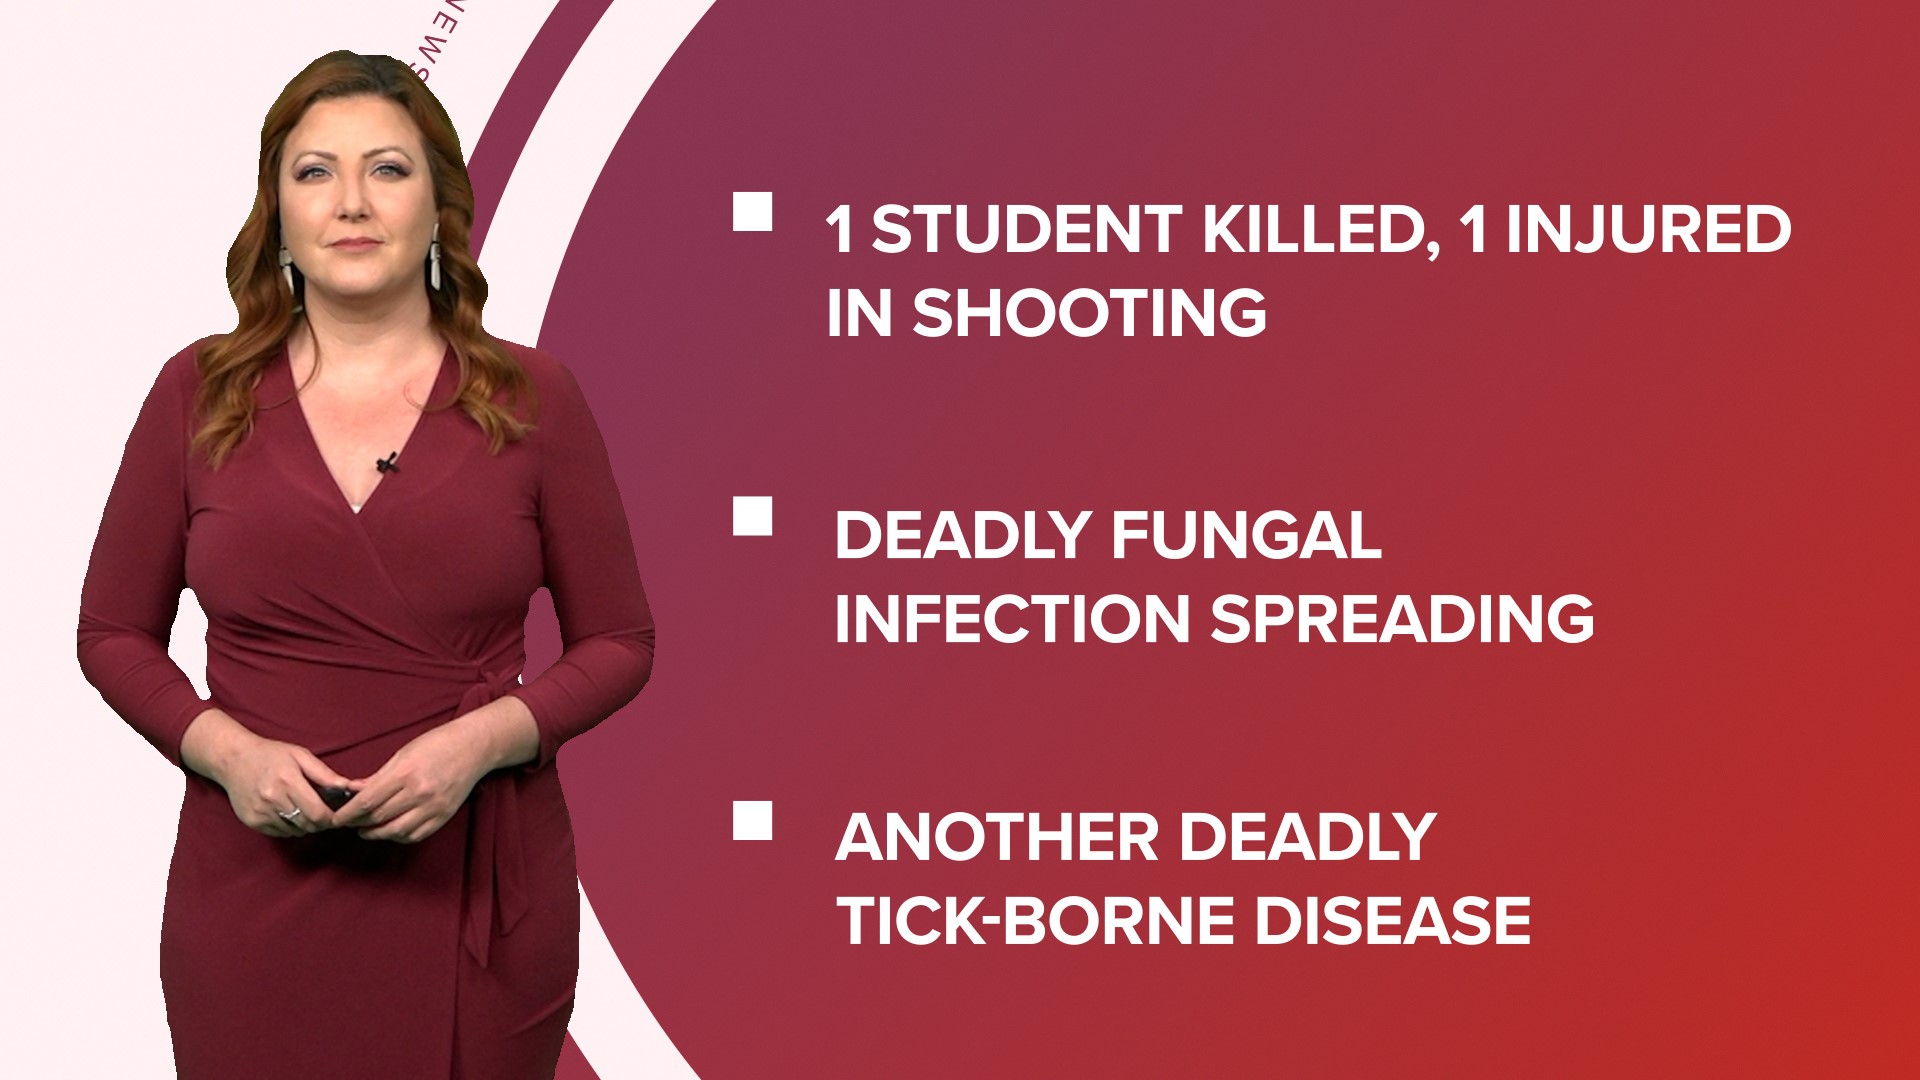 A look at what is happening in the news from a deadly fungal infection spreading at alarming rates to school workers on strike in Los Angeles.